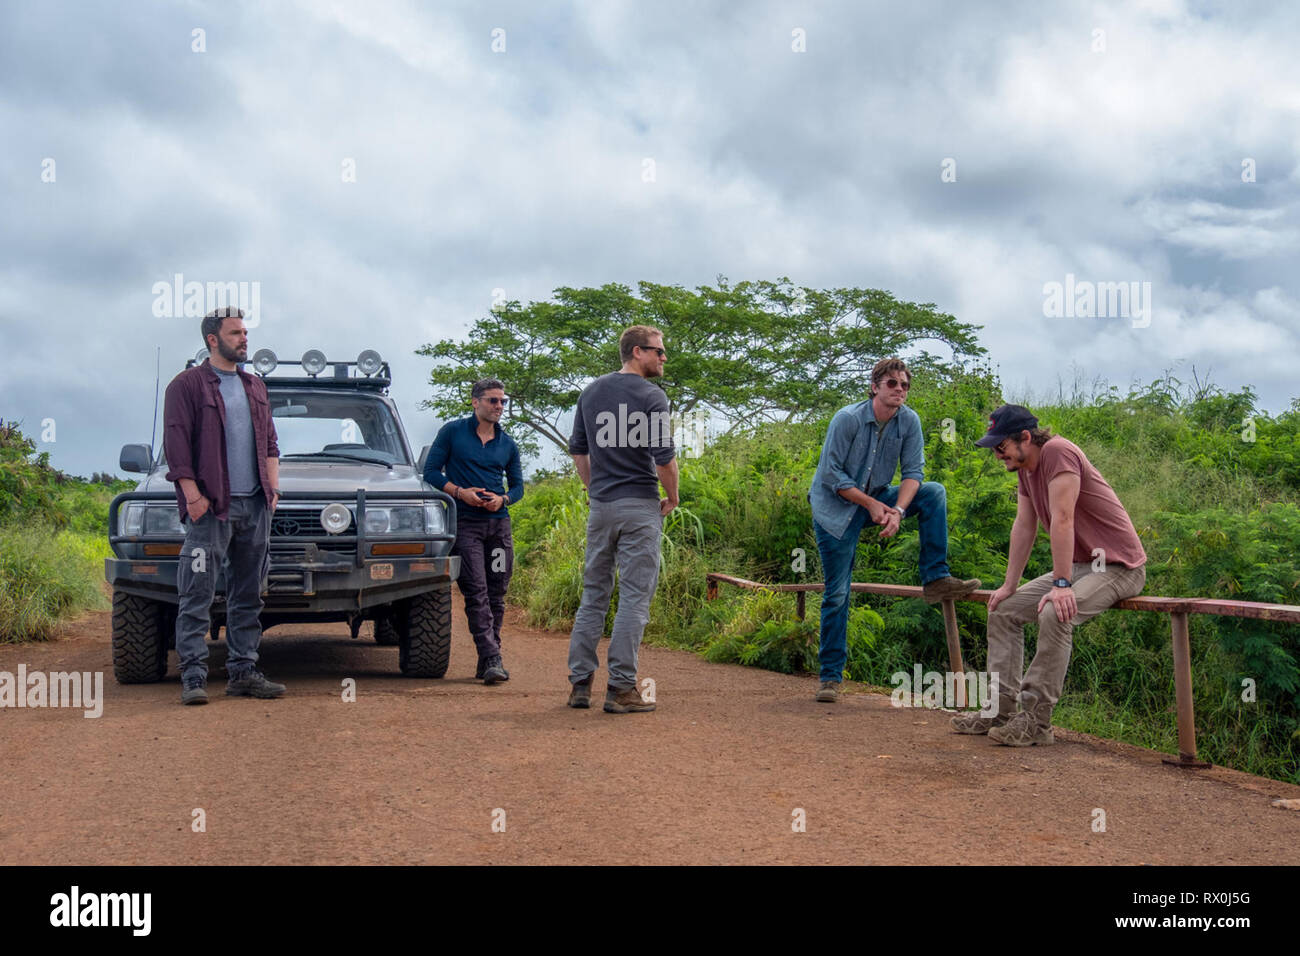 Triple Frontier is an upcoming 2019 American action thriller film directed by J. C. Chandor, with a screenplay by Chandor and Mark Boal, from a story by Boal. The film stars Ben Affleck, Oscar Isaac, Charlie Hunnam, Garrett Hedlund, and Pedro Pascal.    This photograph is supplied for editorial use only and is the copyright of the film company and/or the designated photographer assigned by the film or production company. Stock Photo